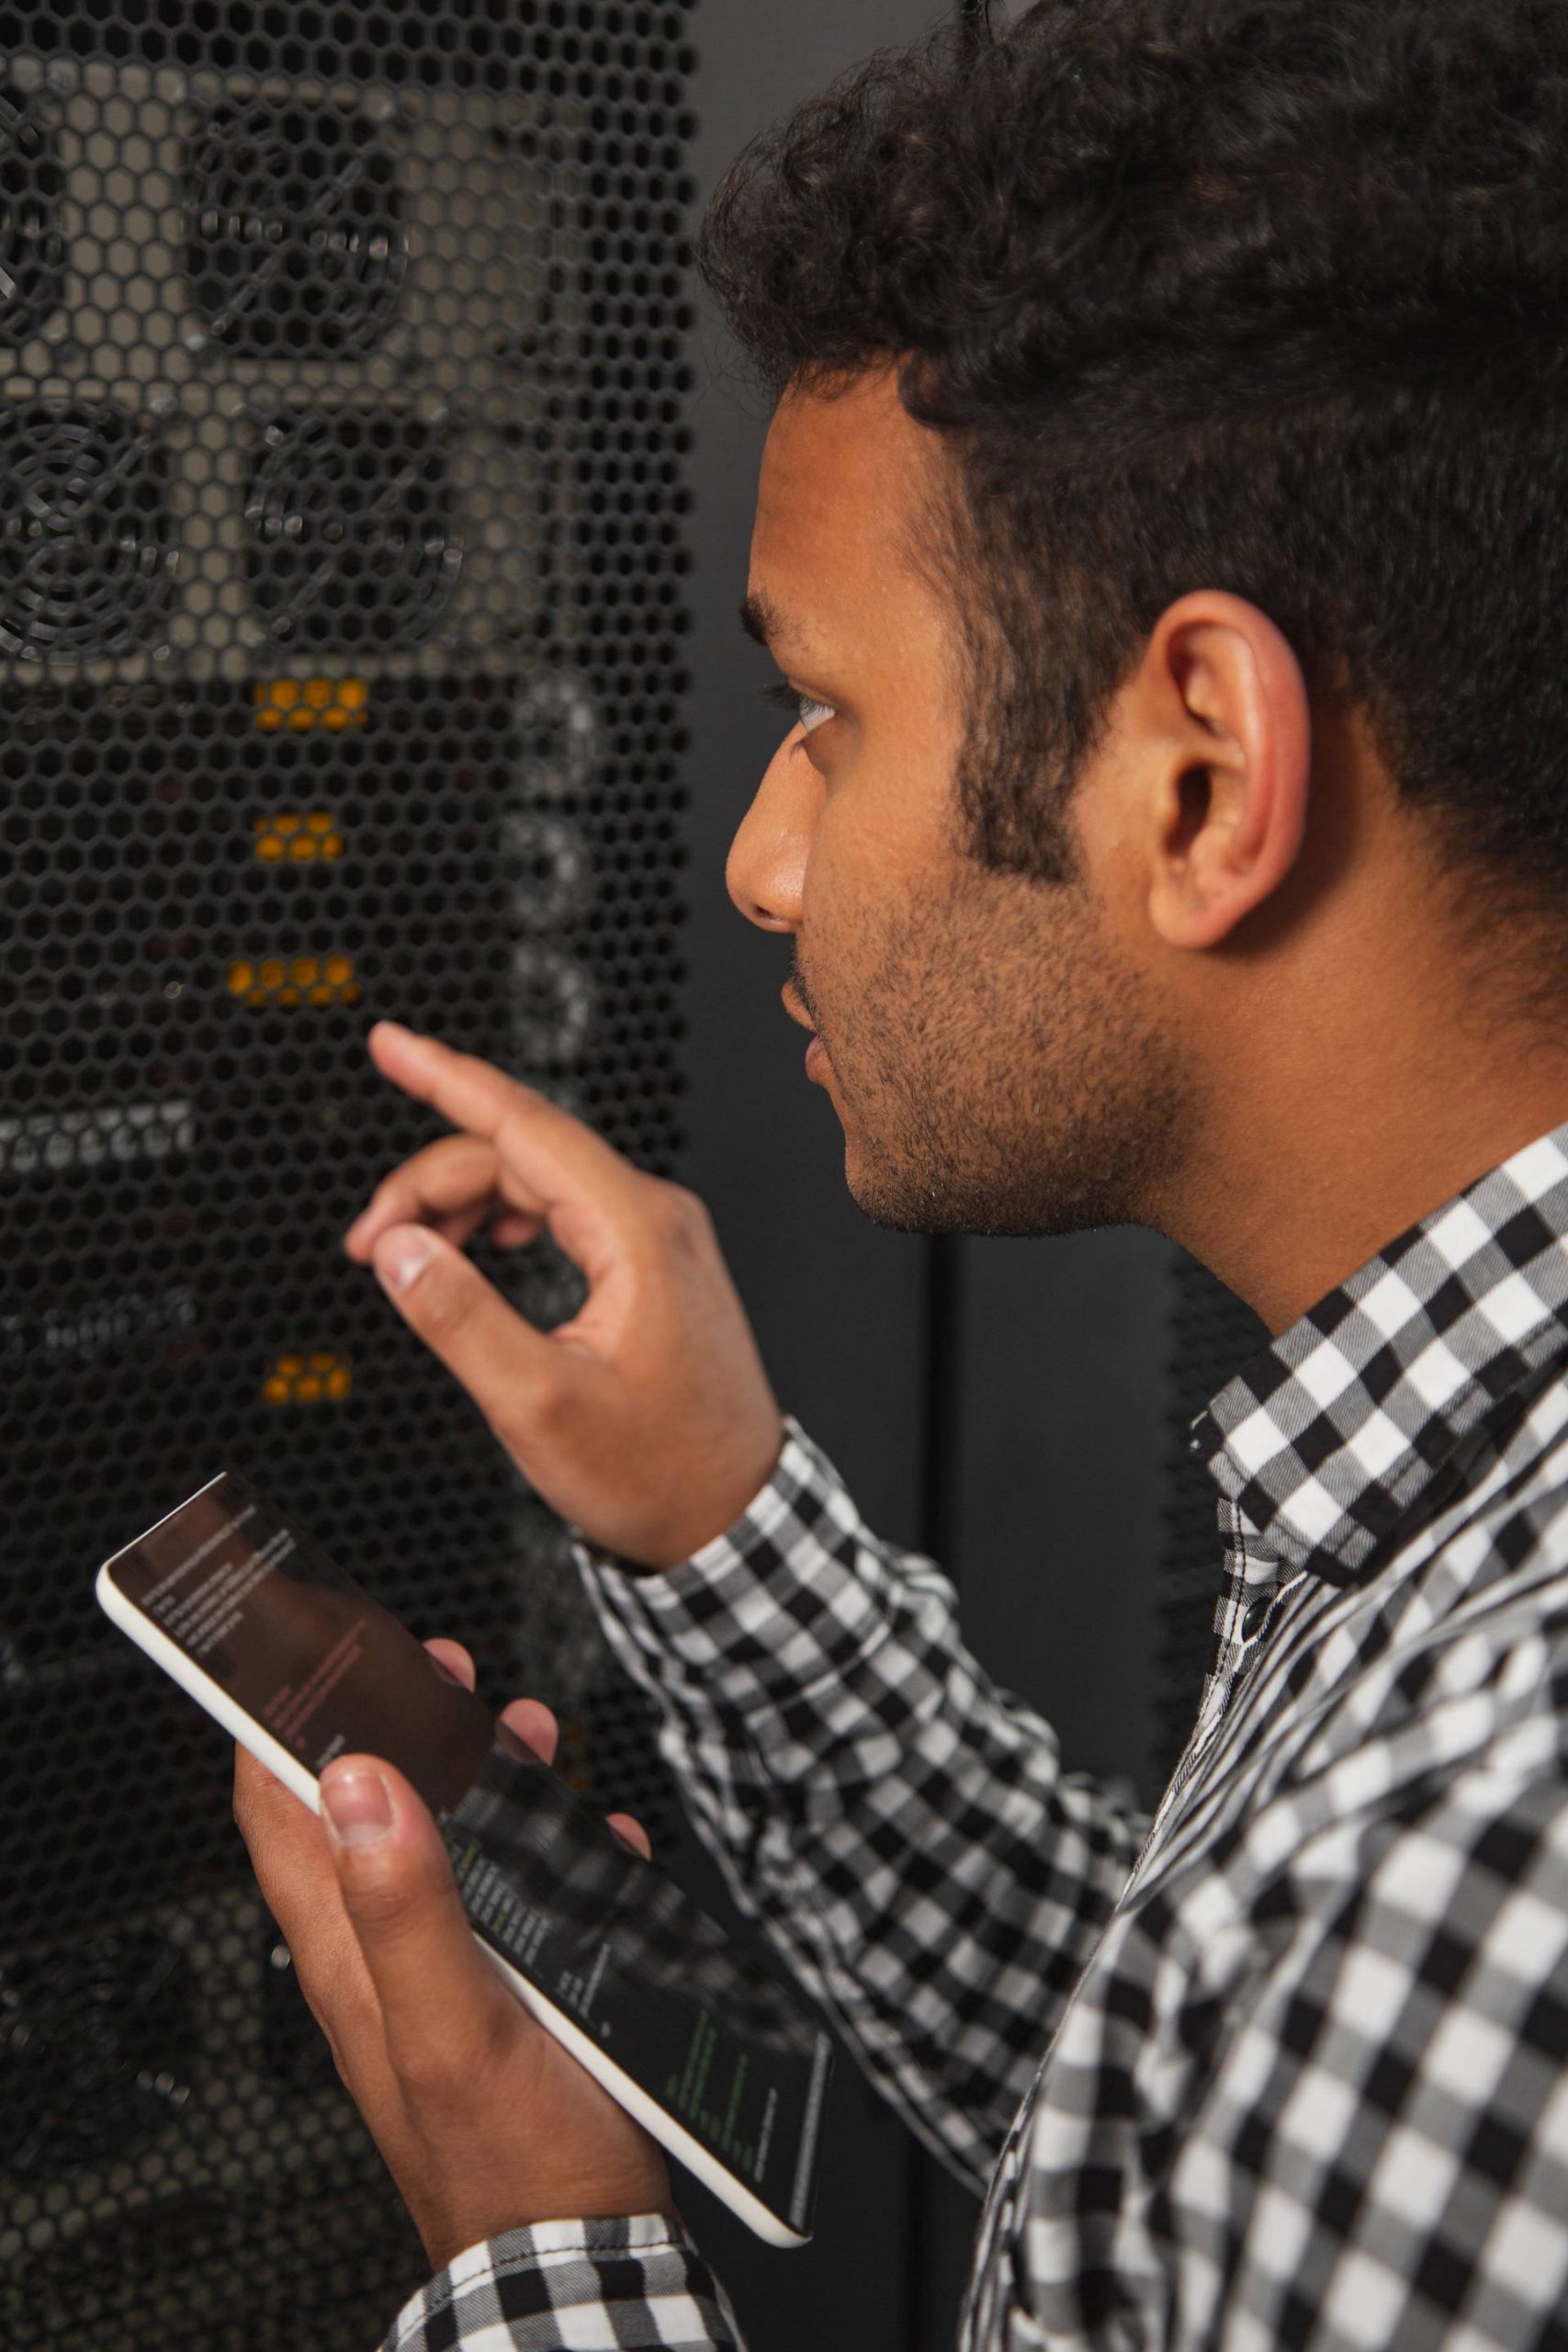 Man looking at server rack while holding cellphone